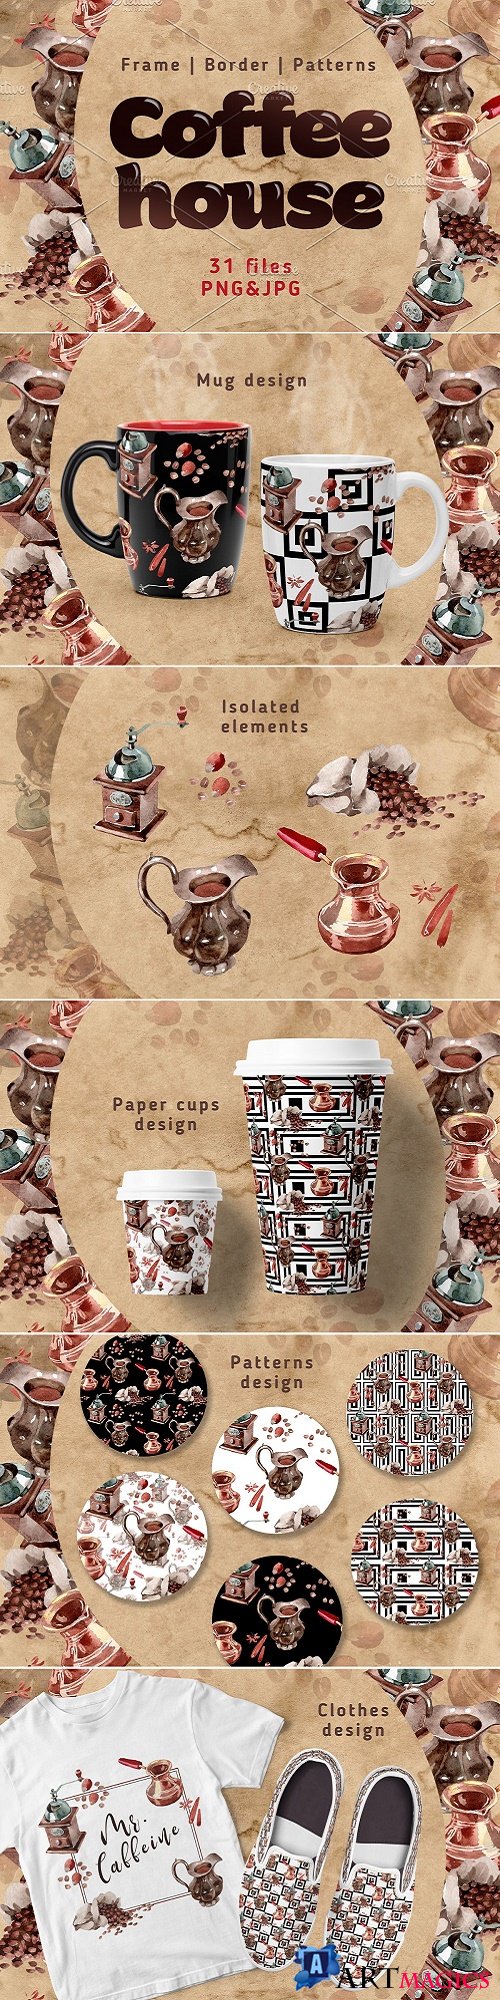 Coffee house PNG watercolor set - 2306678